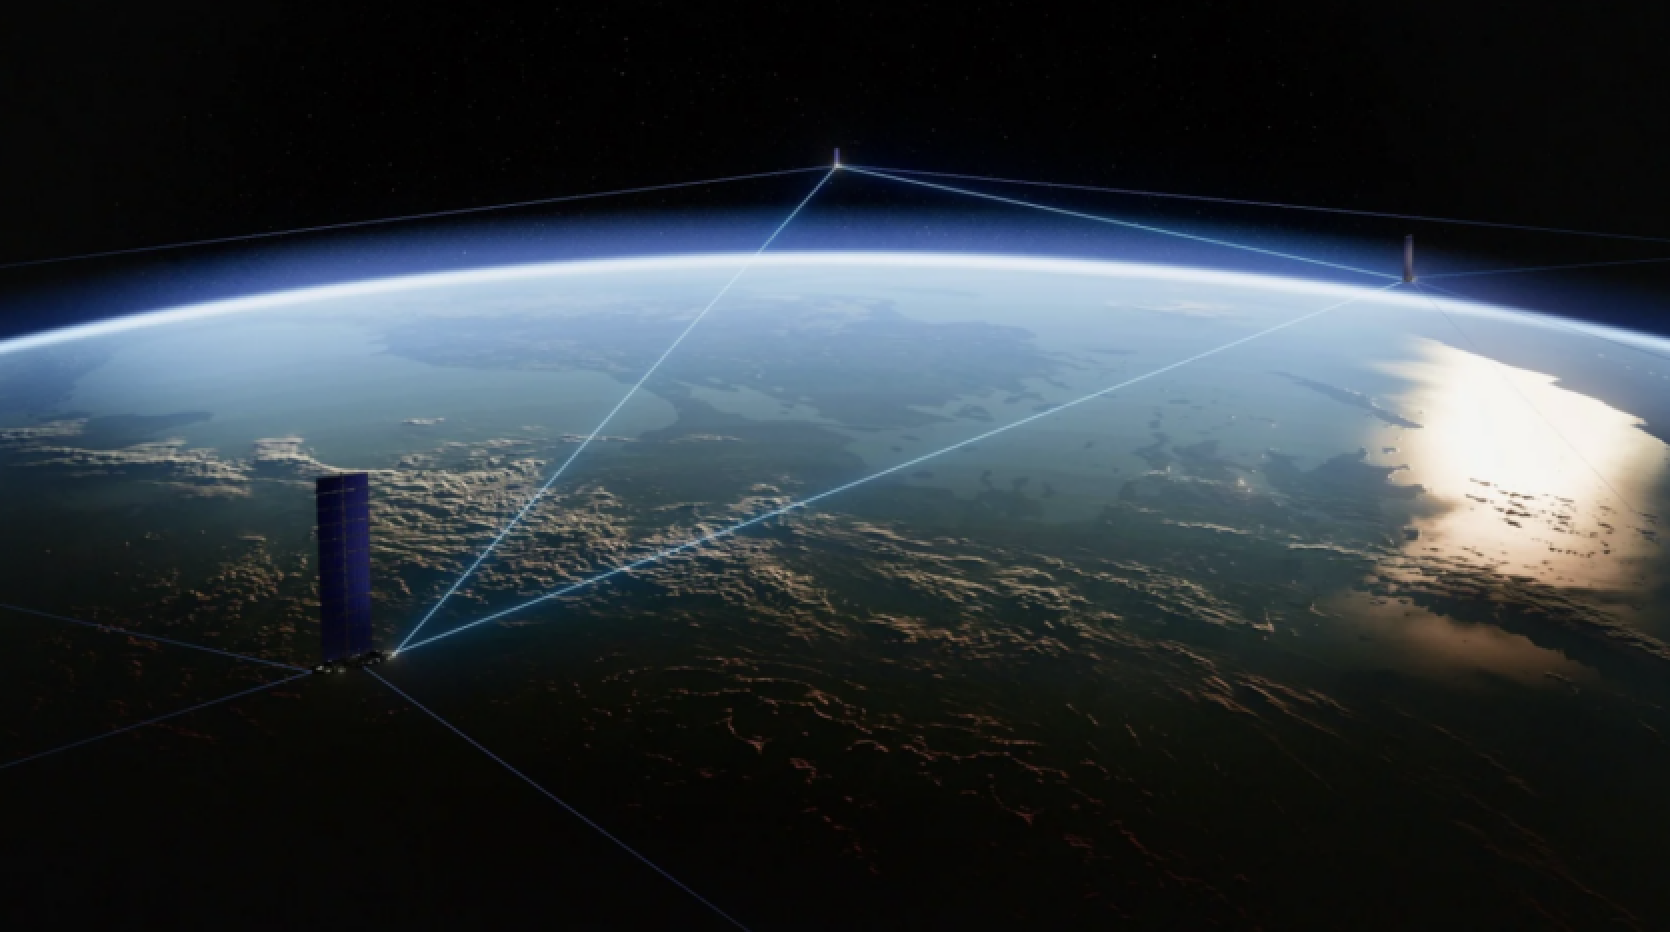 SpaceX's Starlink laser system transmits more than 42 petabytes (42 million GB) daily